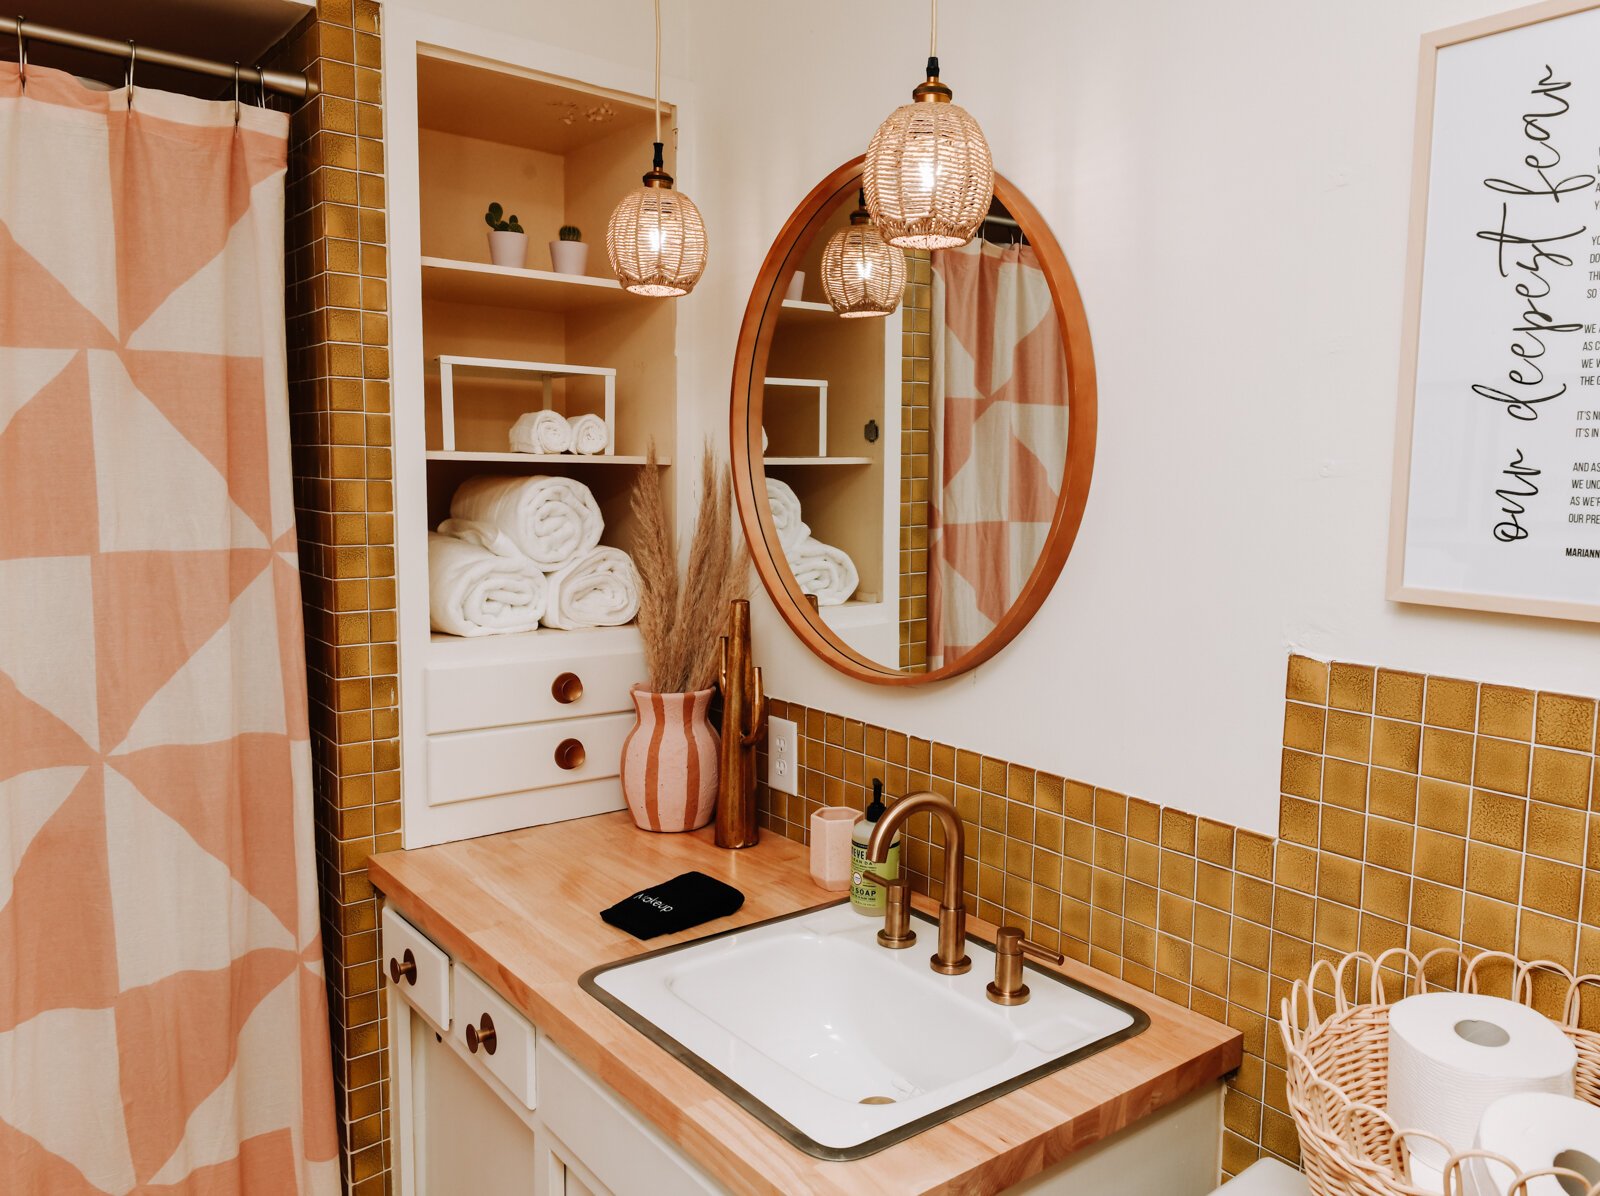 The master bathroom features a gold and pink color scheme.